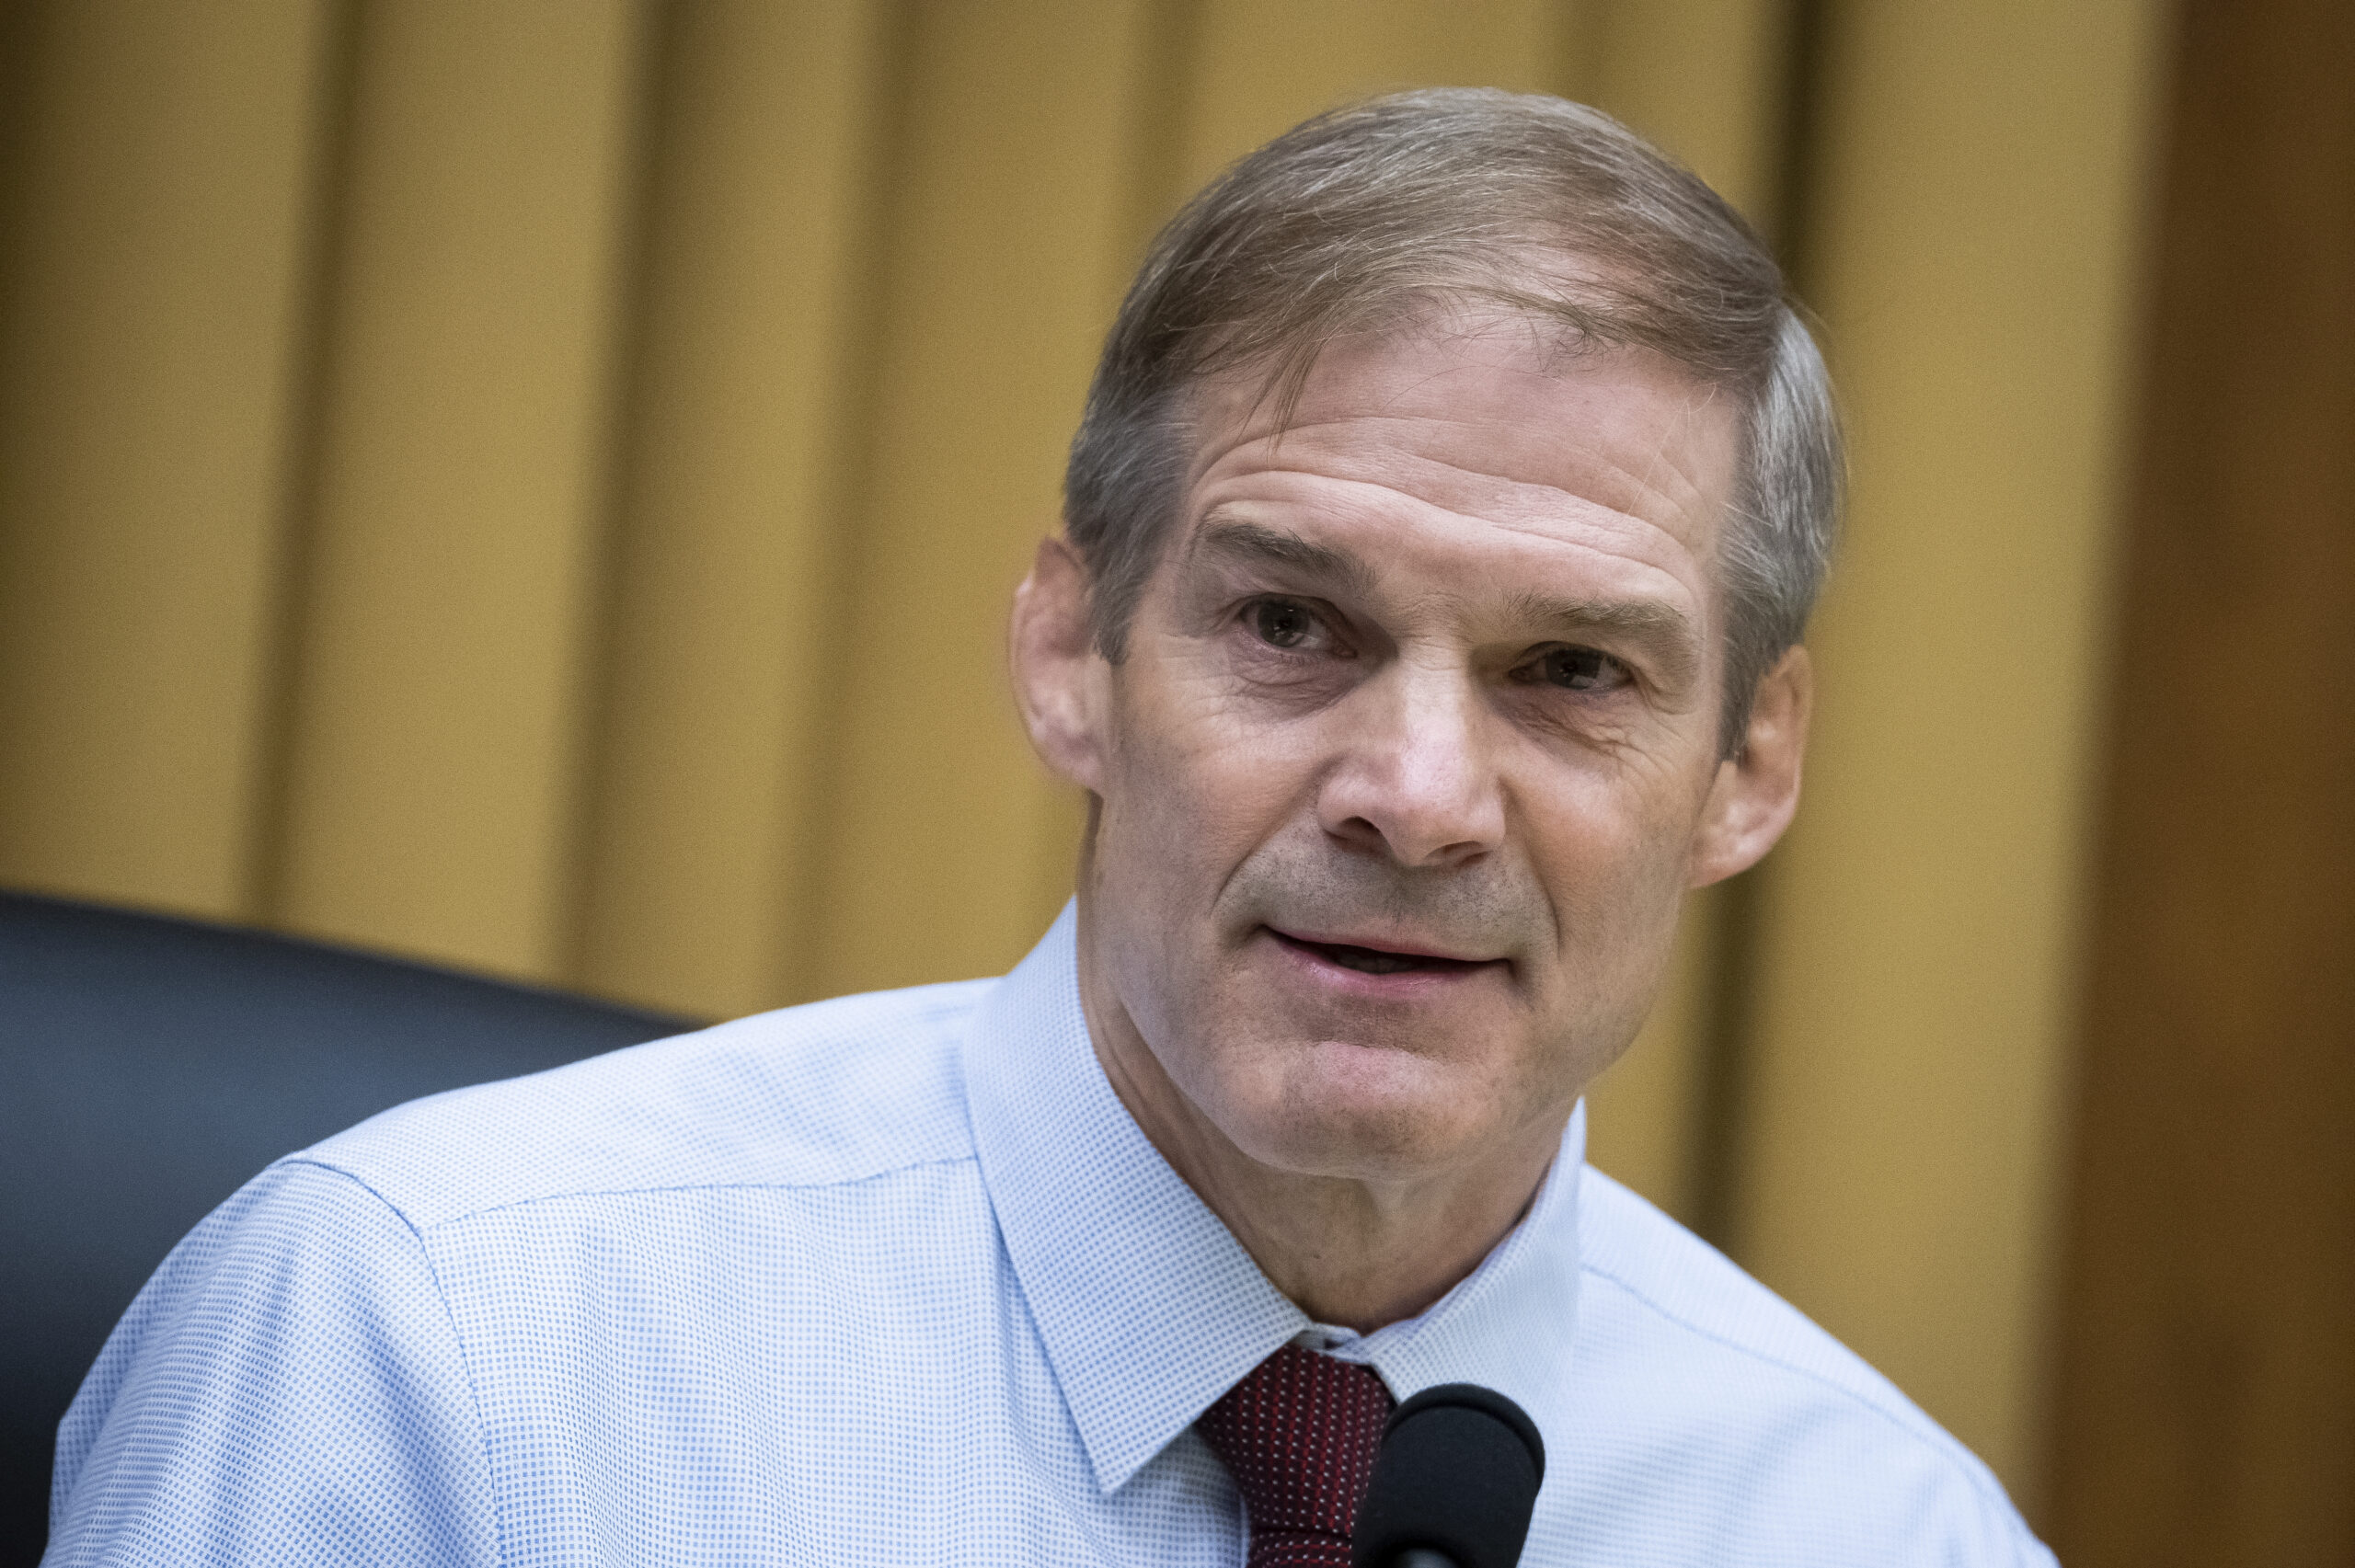 Fani Willis Tells Jim Jordan to Pound Sand in Scathing Letter: ‘You Are Abusing Your Authority’